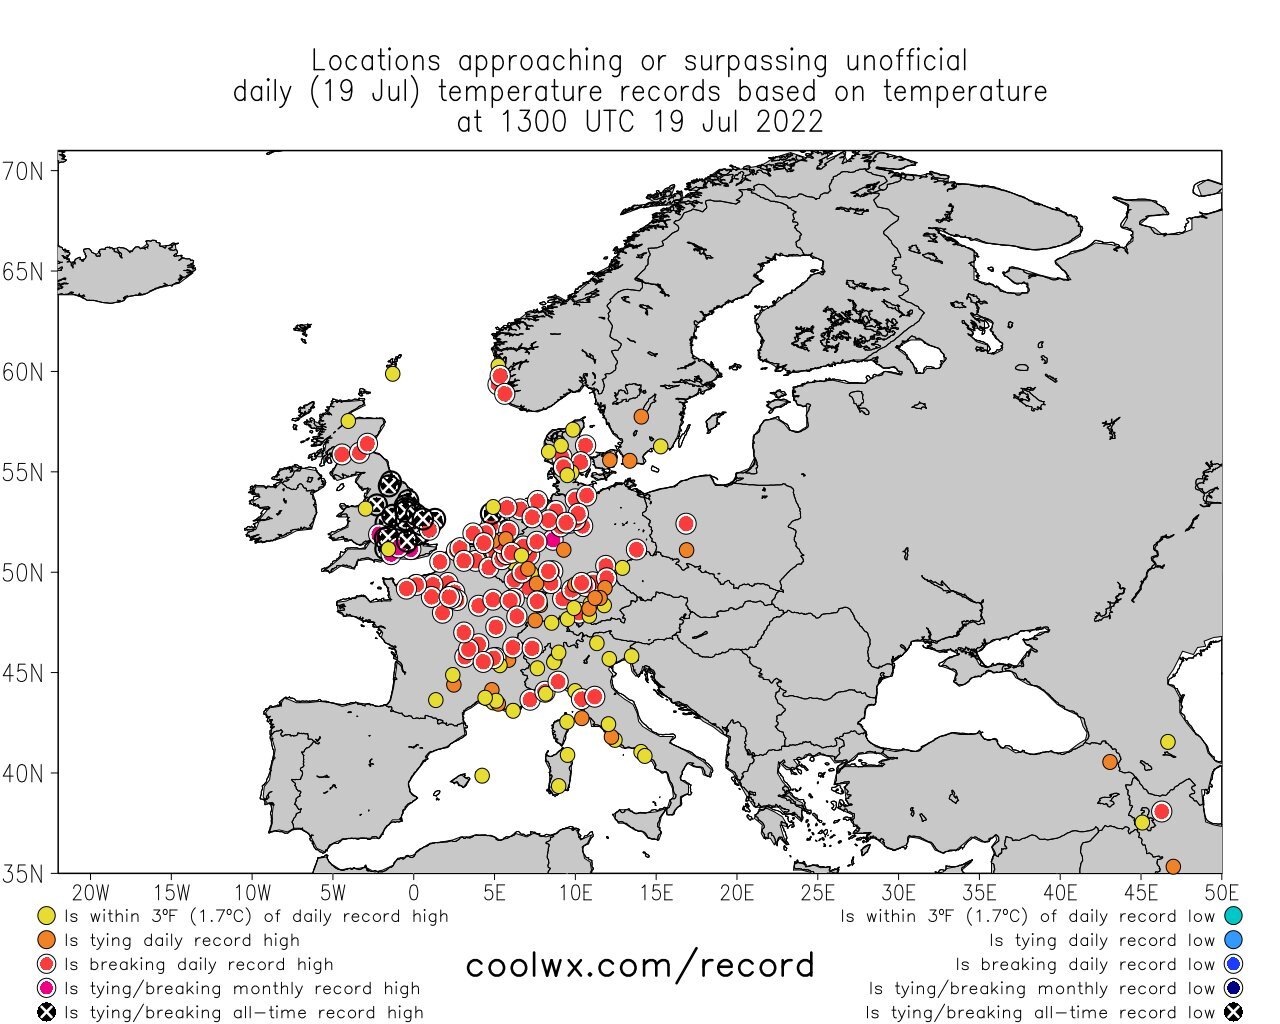 tations with provisional records set on 19 July. Coloured dots indicate tying/breaking the all-time record high (black), tying/breaking the monthly record high (pink), breaking the daily record high (red), tying the daily record high (orange) and within 1.7C of the daily high (yellow). Credit: coolwx.com